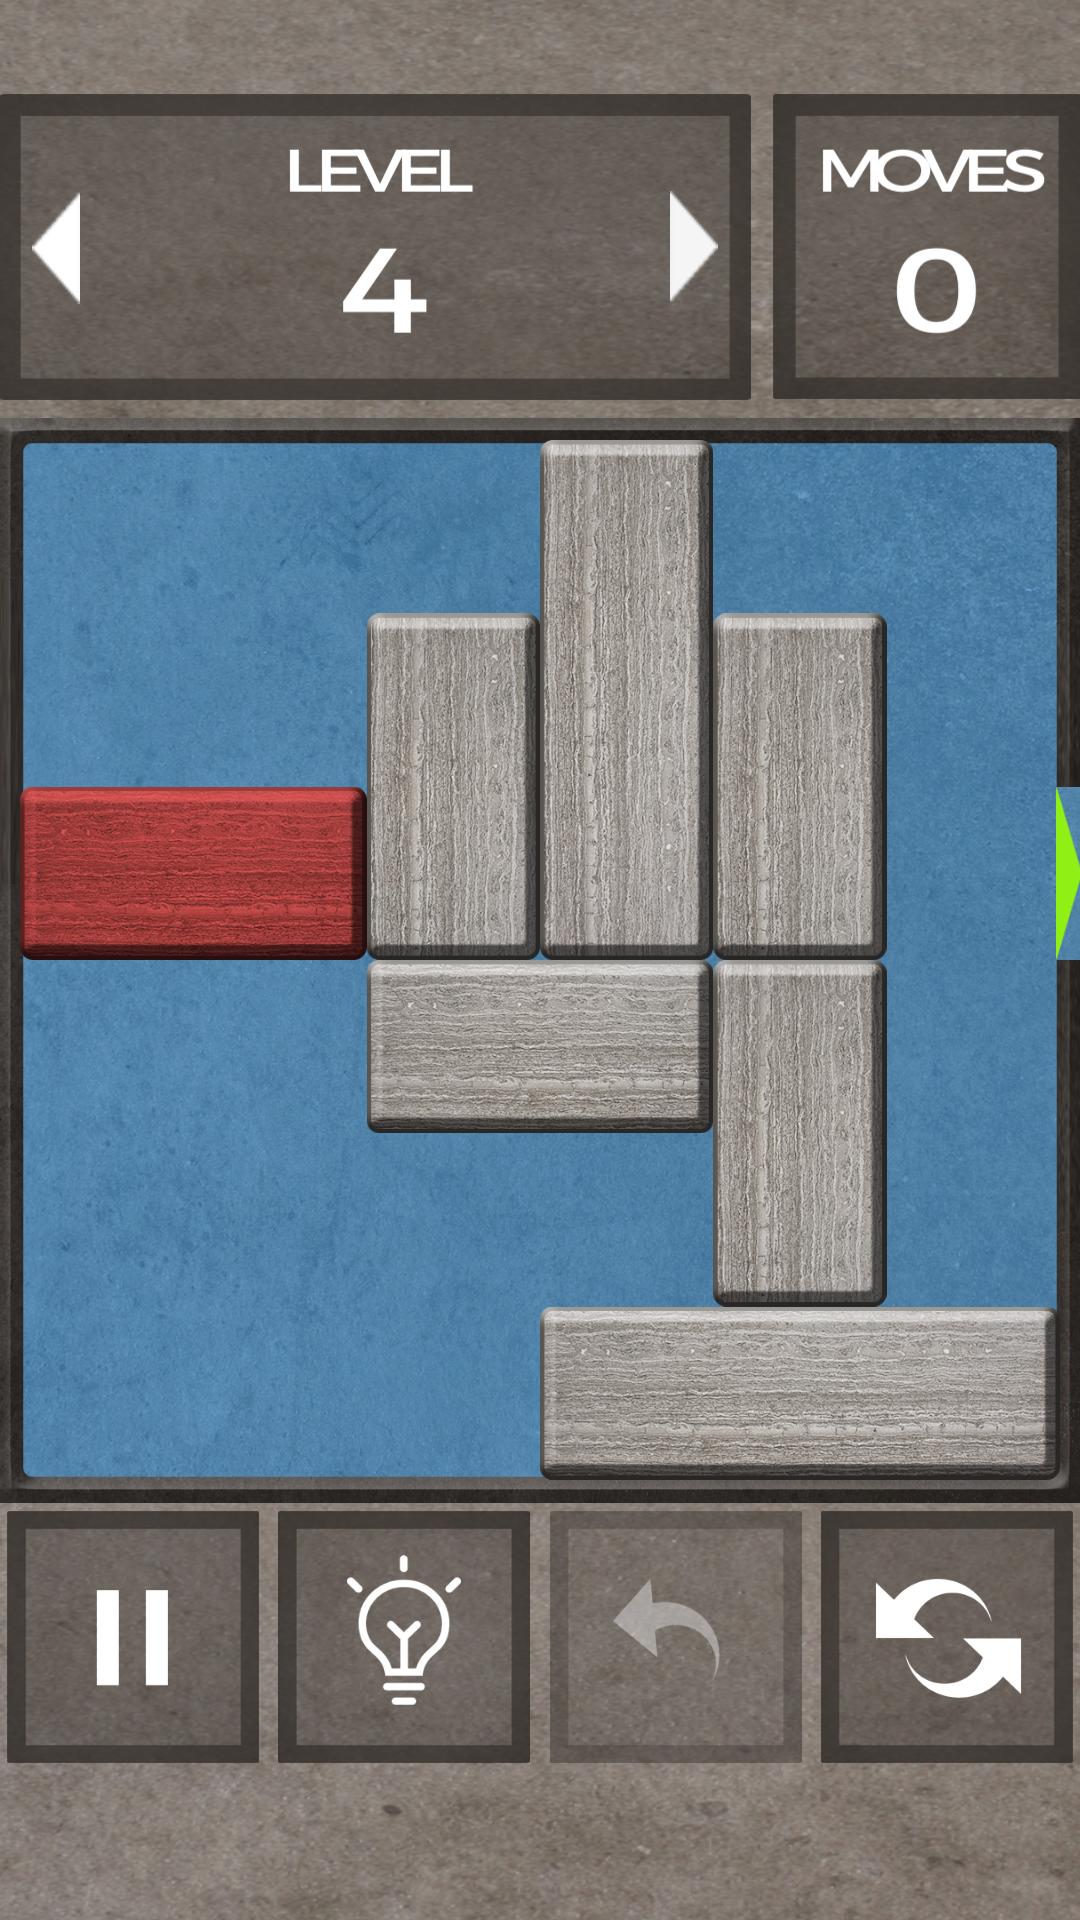 Unblock for Android - APK Download